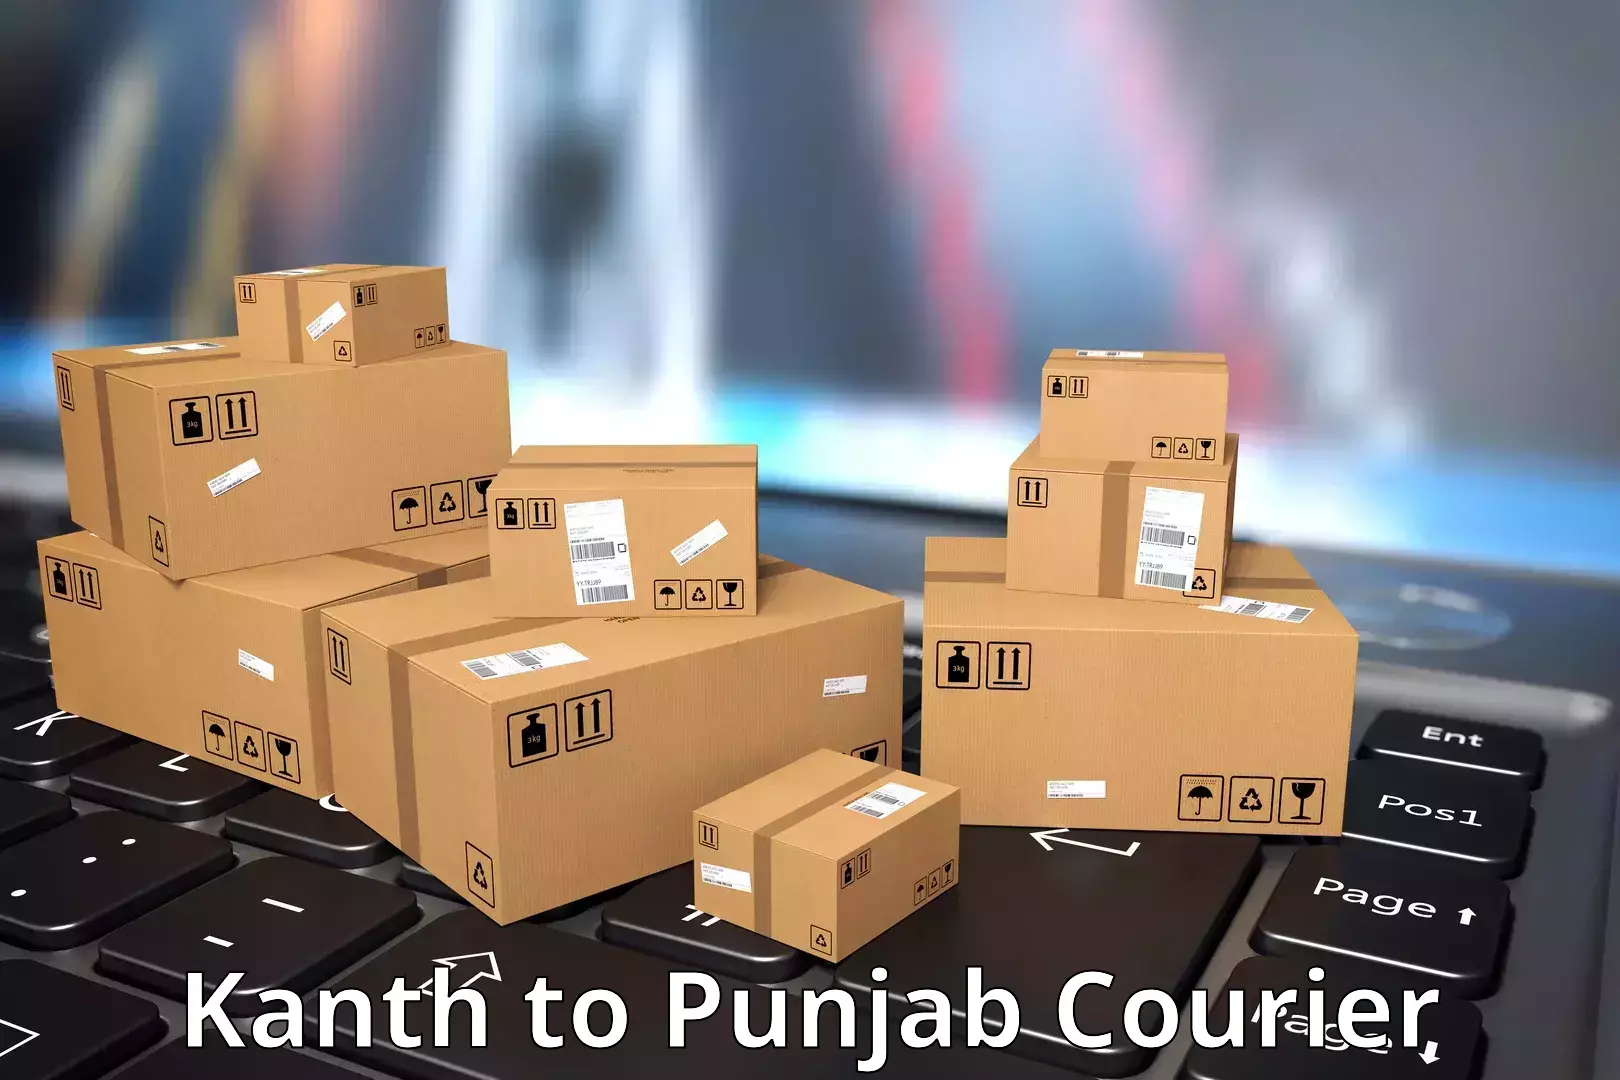 Corporate courier solutions Kanth to Ludhiana